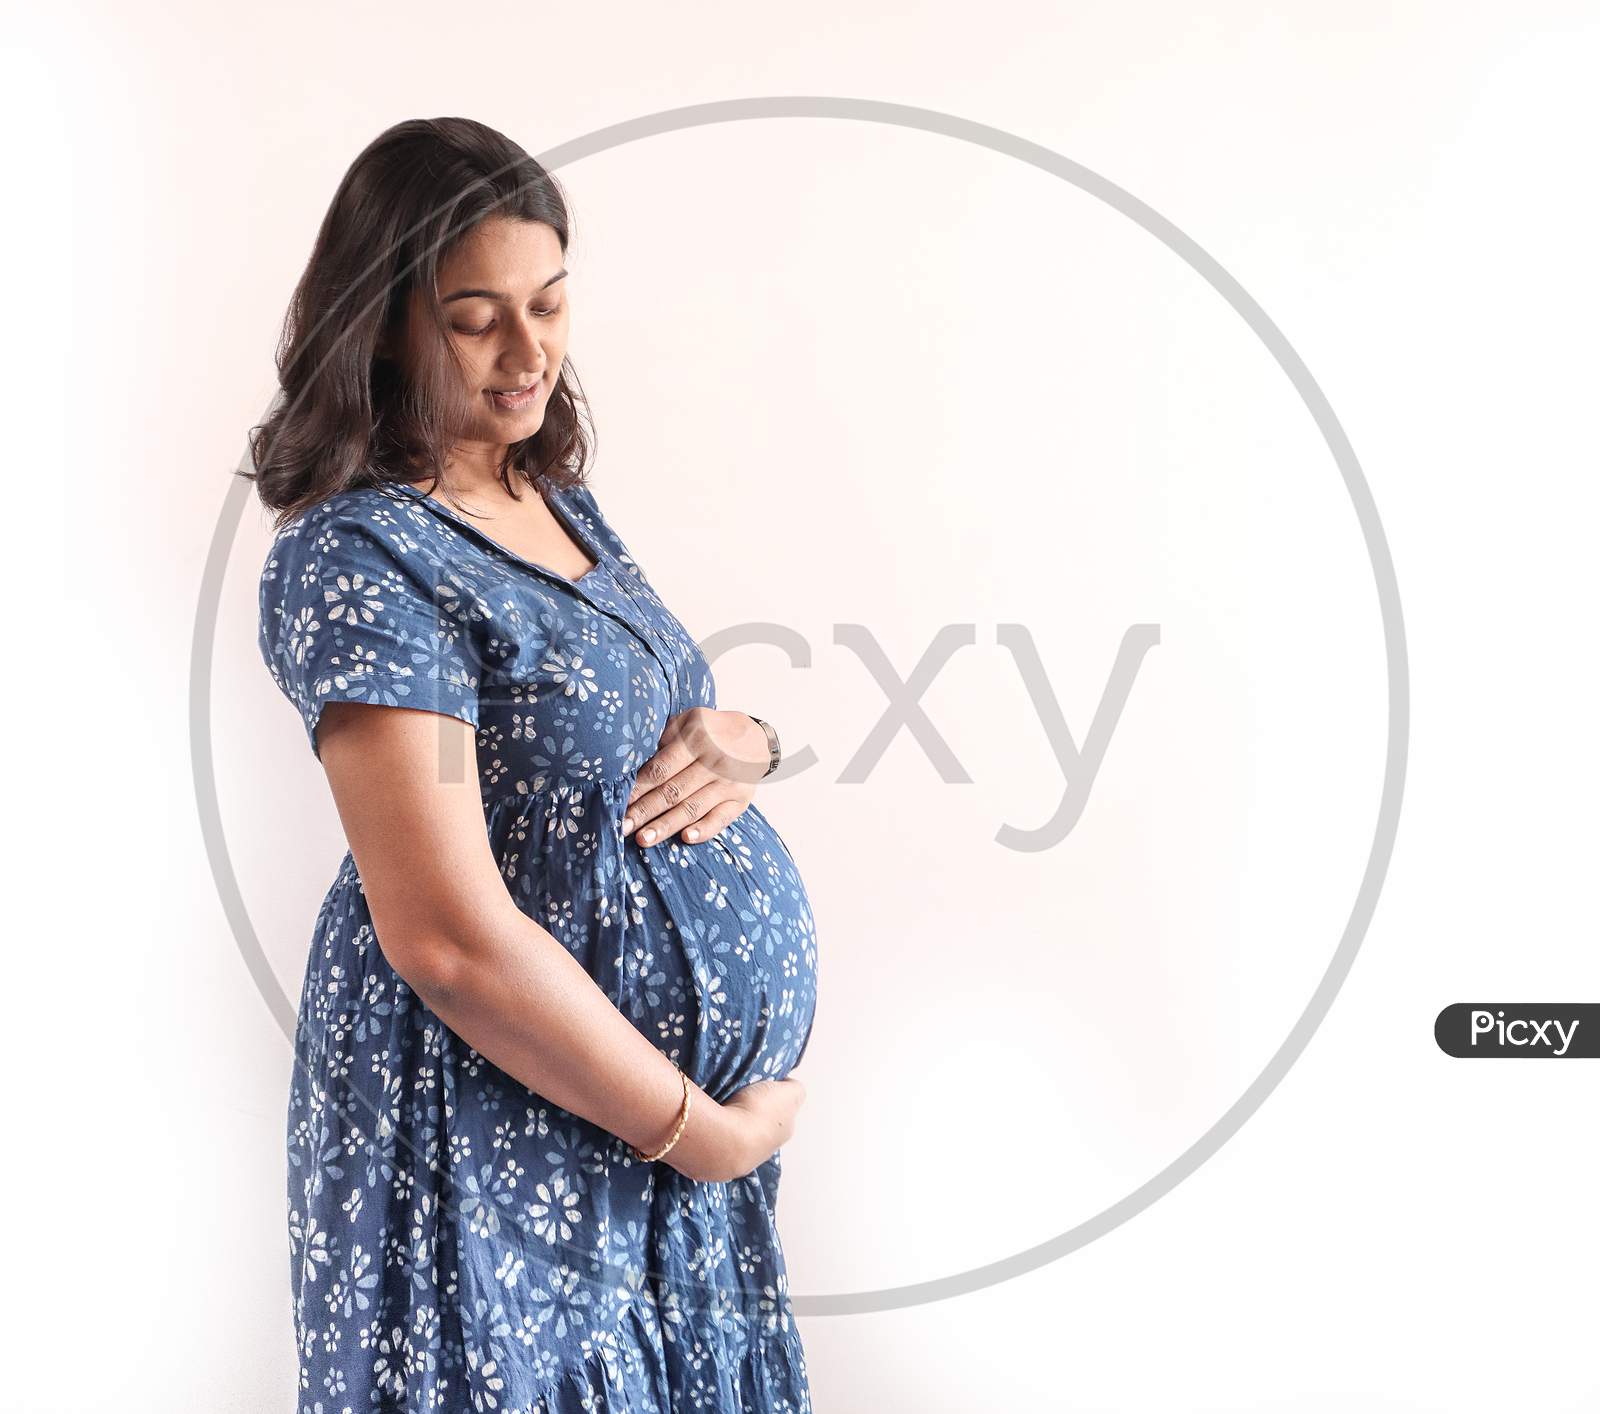 A Pregnant Indian Lady With Blue Dress And Hands On Belly